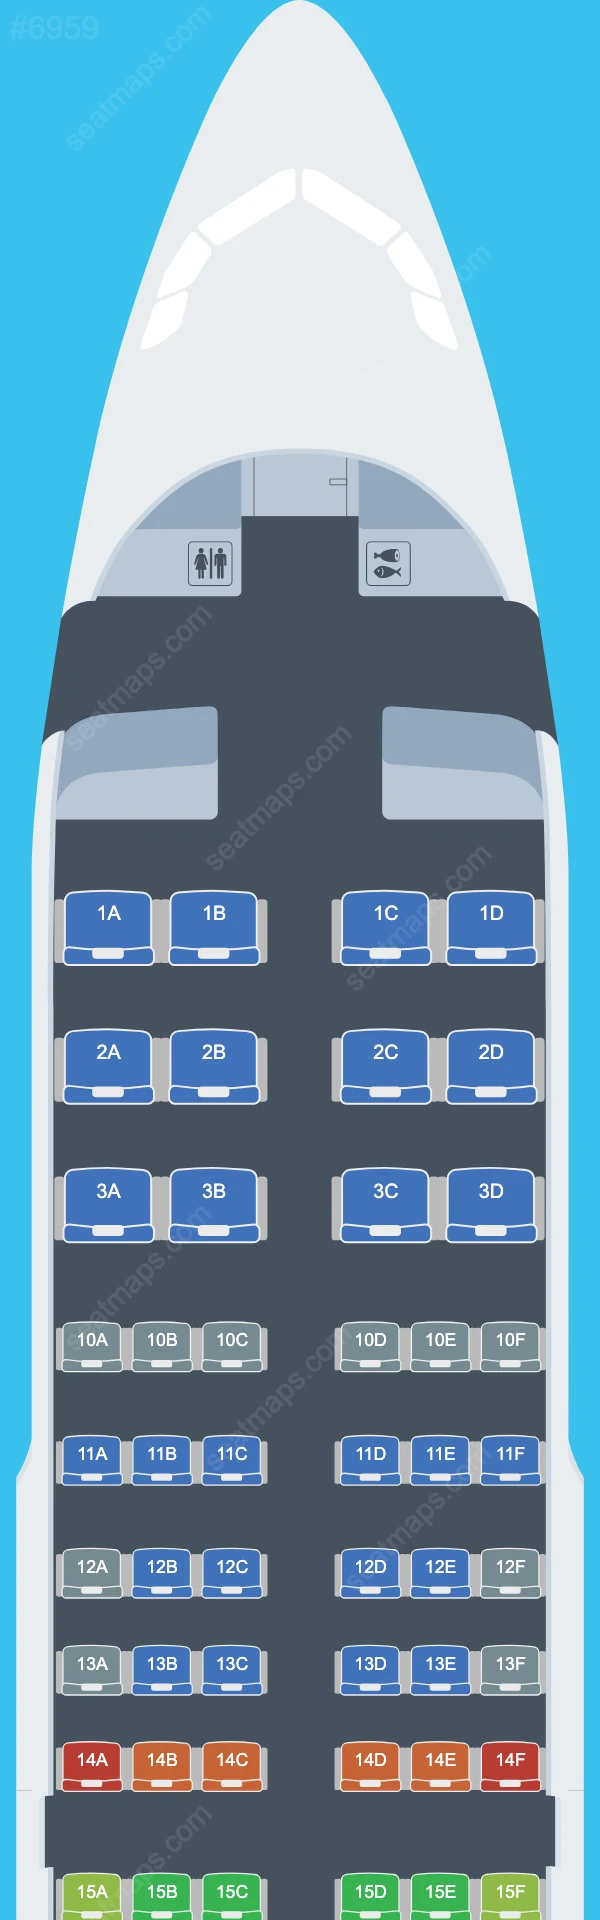 Delta Airbus A319 Seat Maps A319-100 V.1